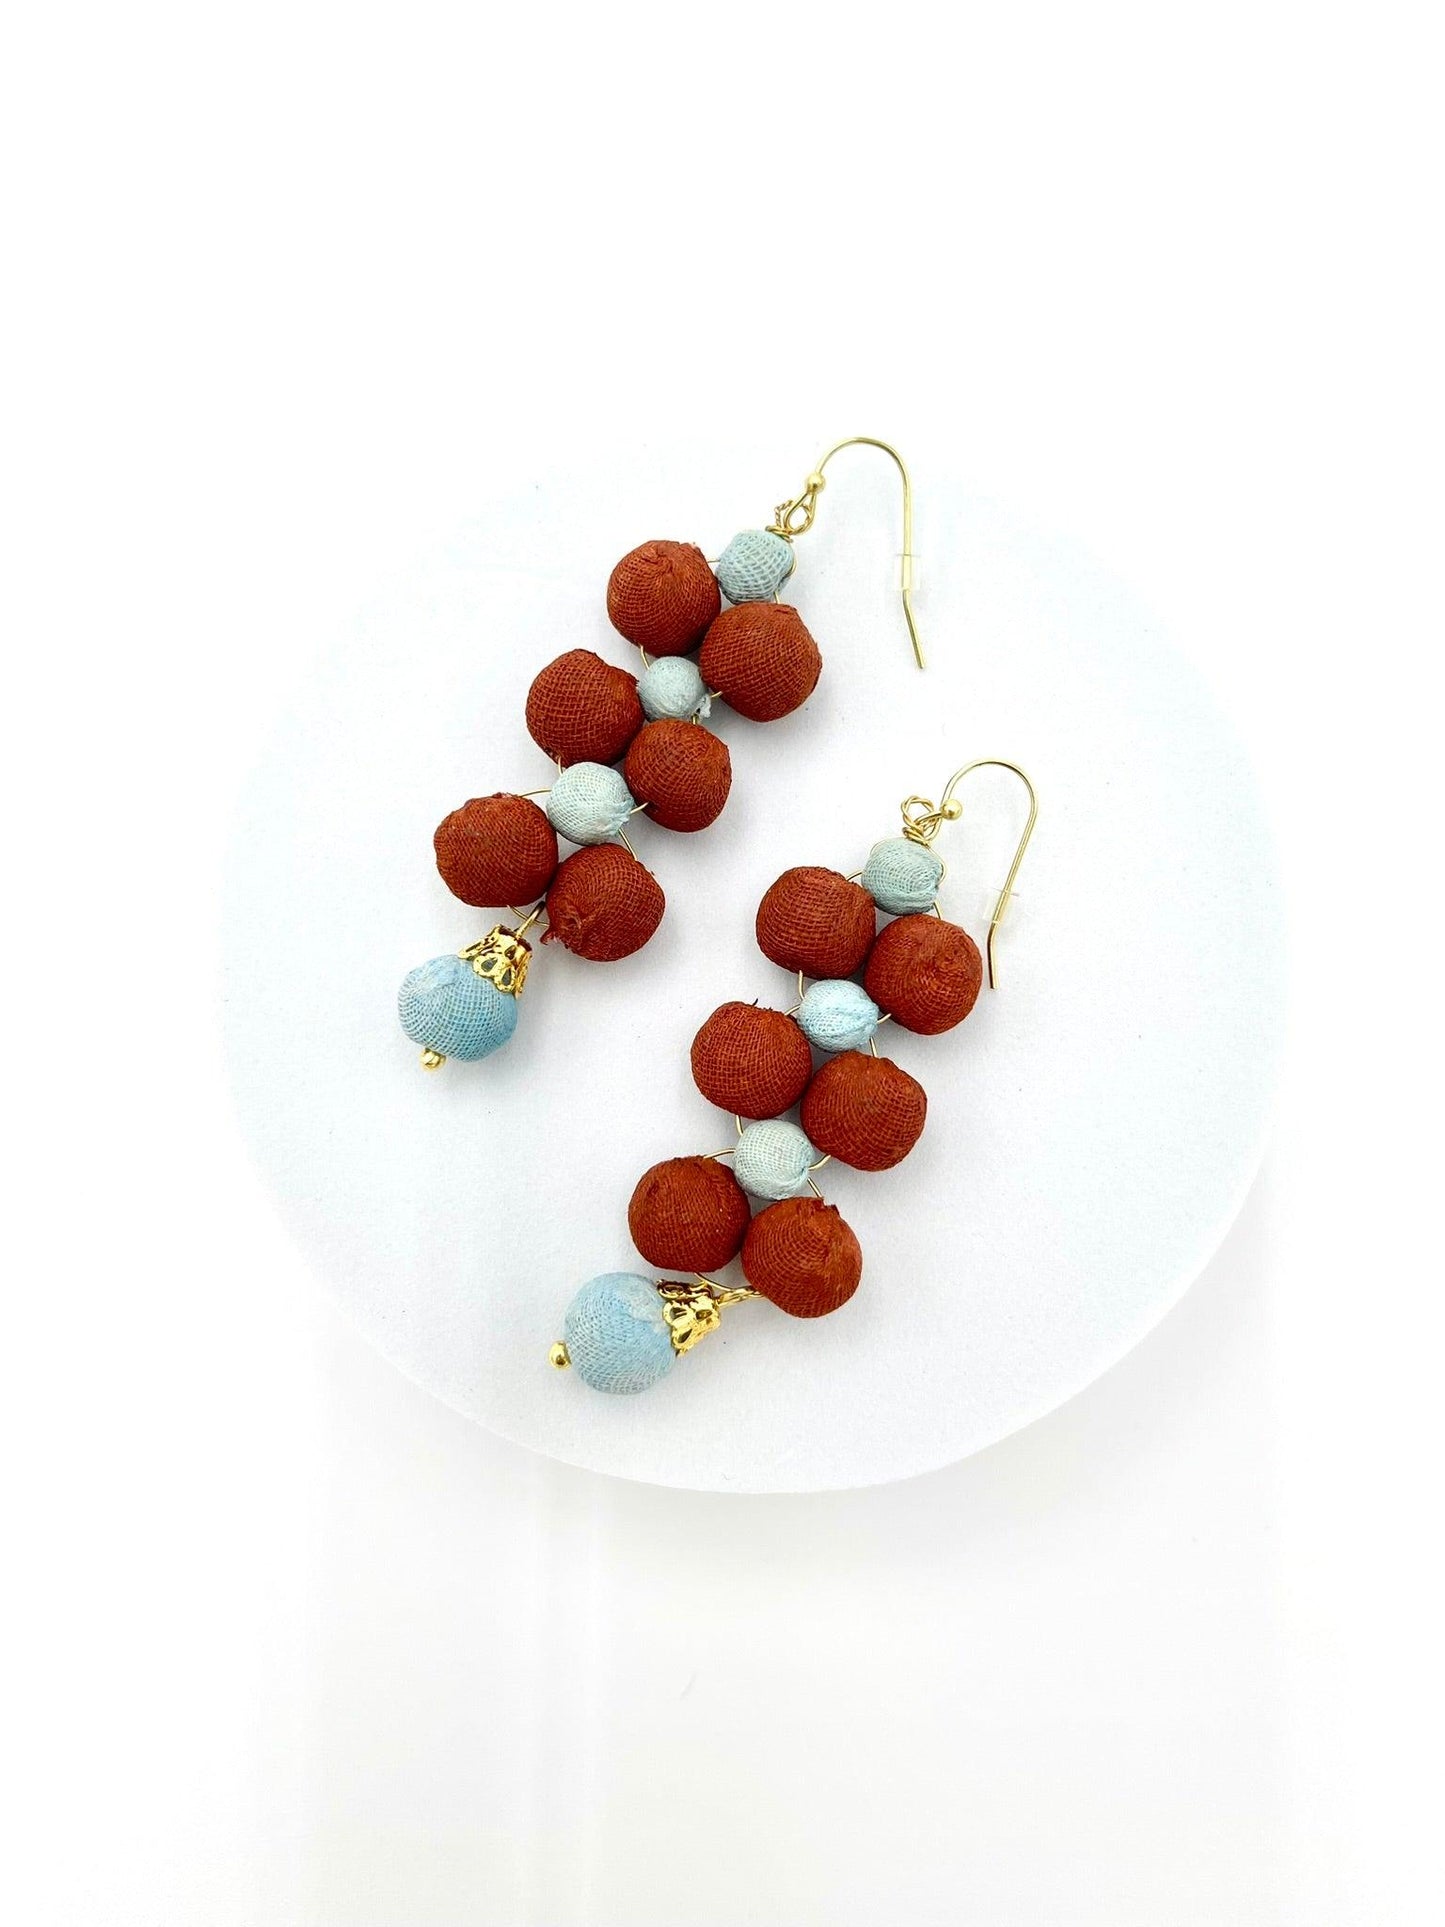 Fair Trade Droplet Earrings with Upcycled Cotton Fabric - Transcend